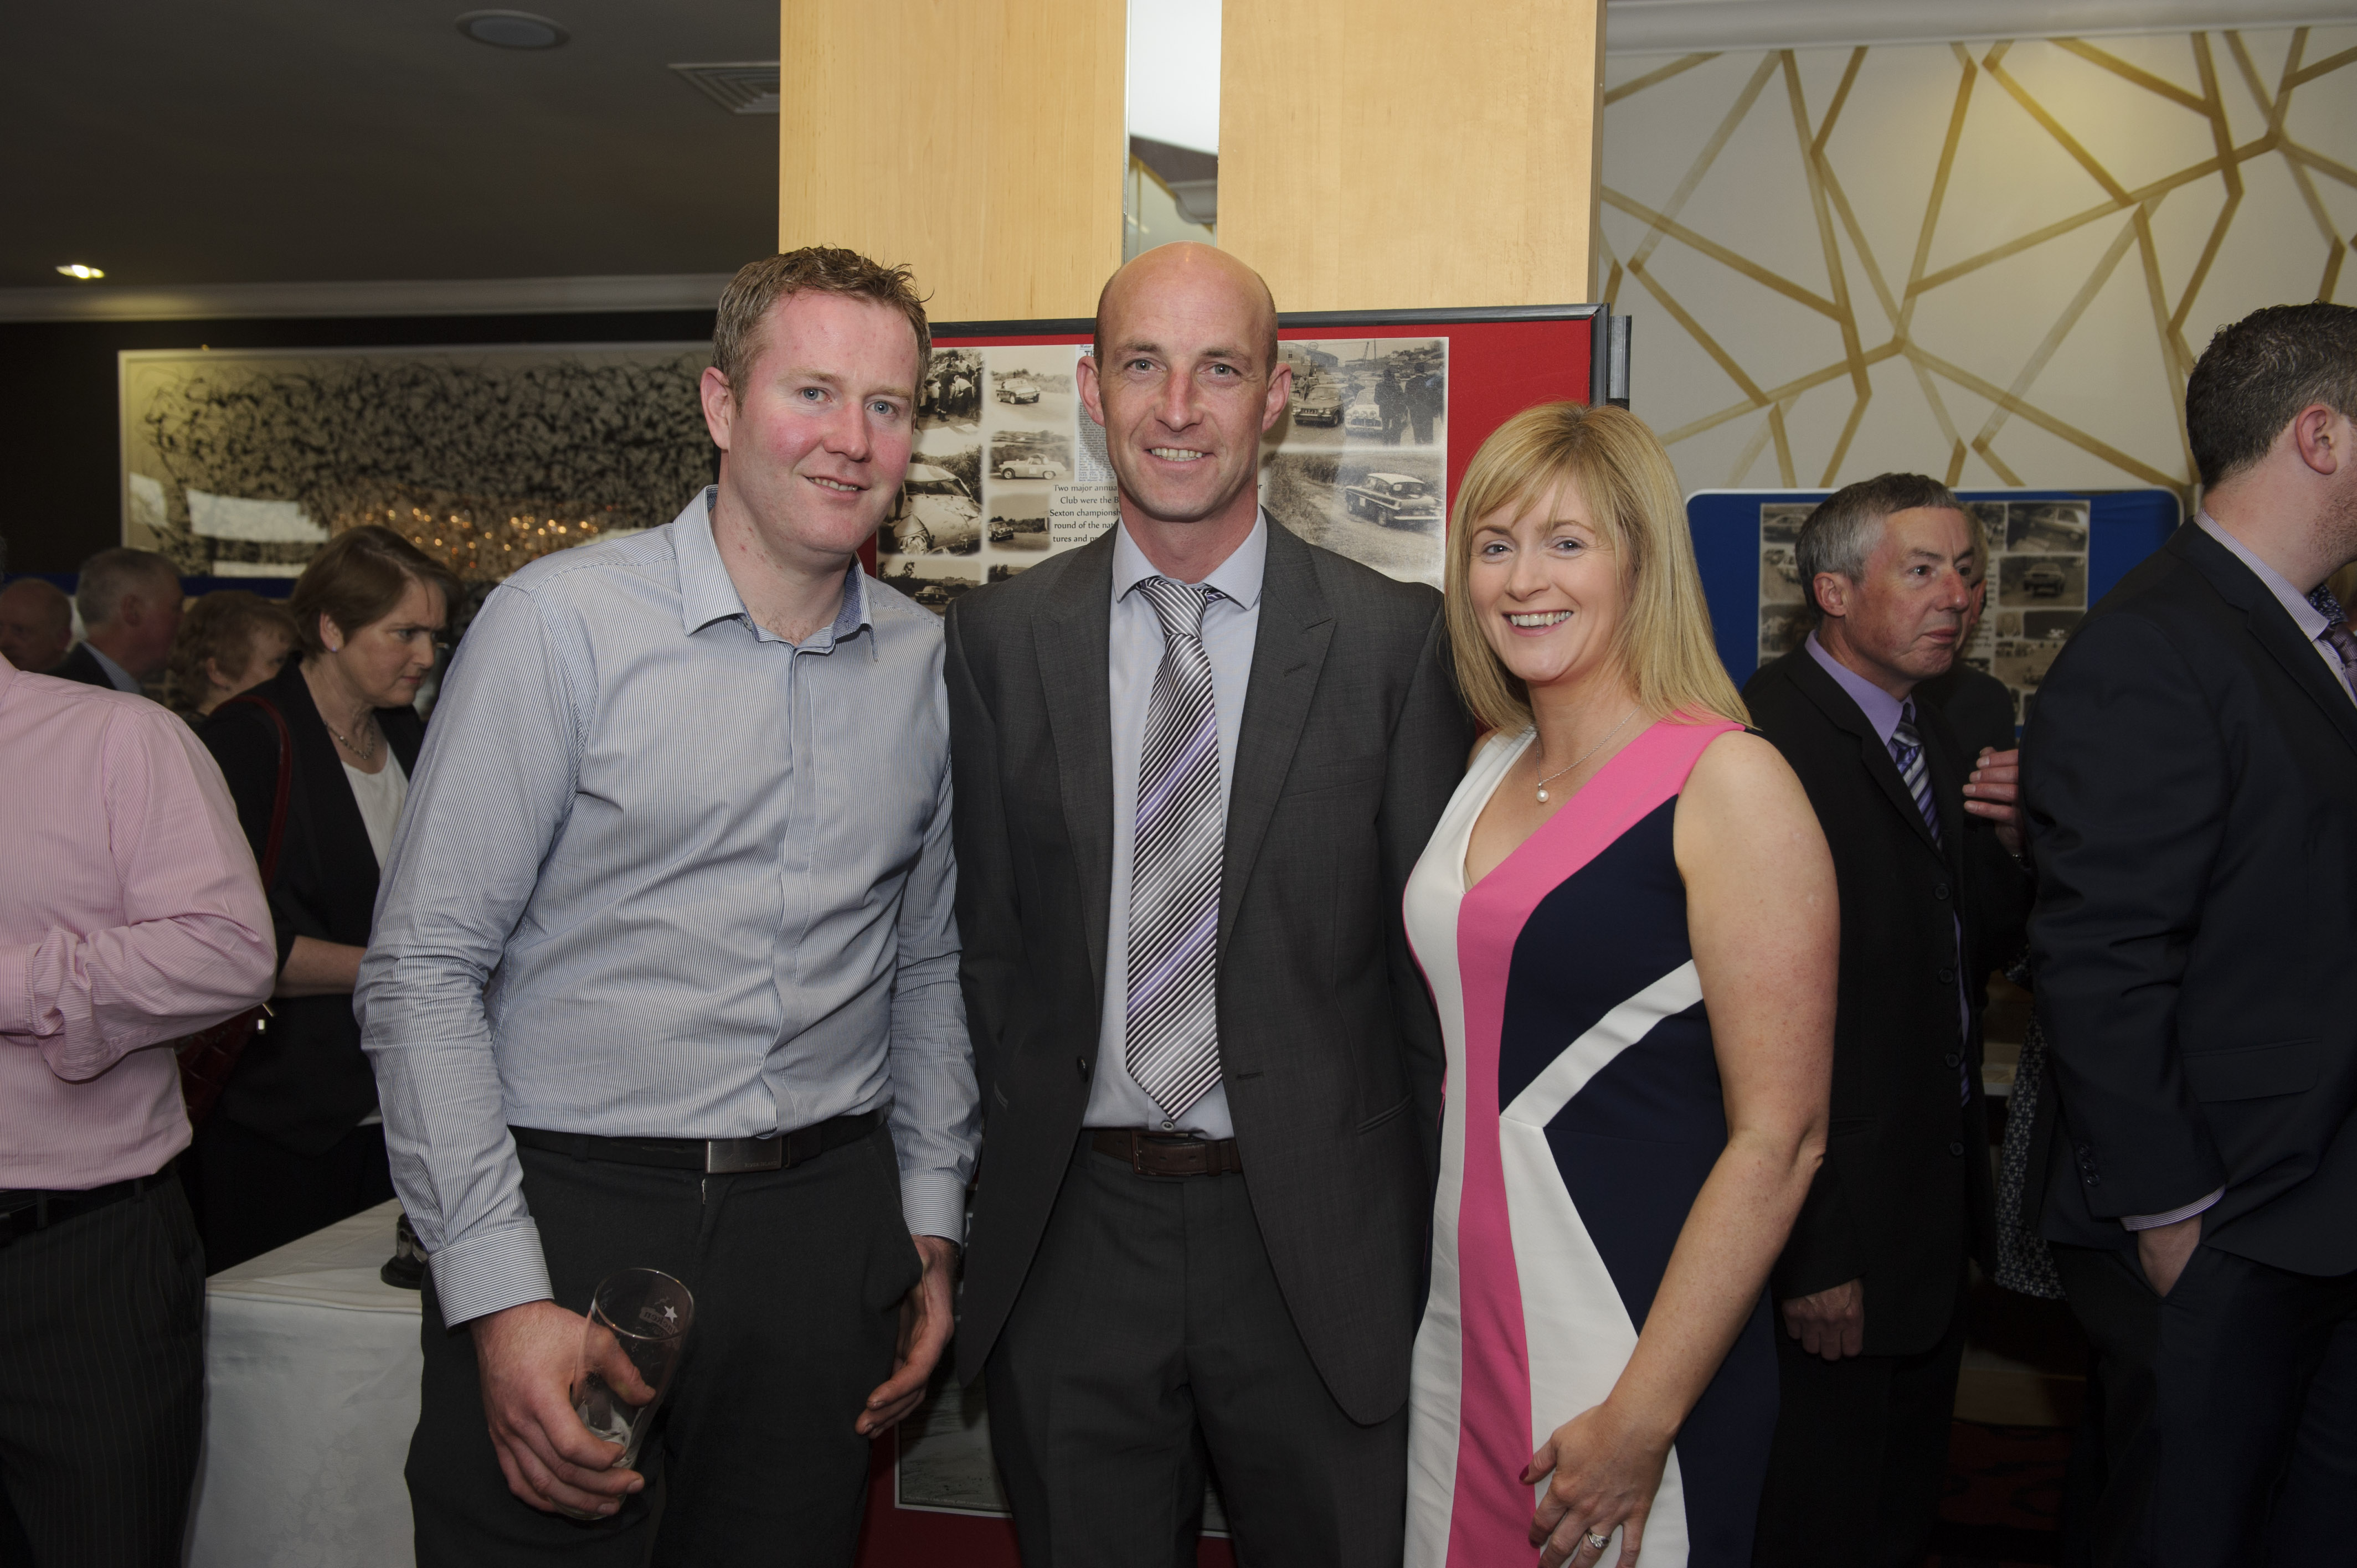 At the Hillgrove Hotel for the Monaghan Motor-club 60th Gala Ball, last weekend were (L-R) David Smith with Martin and Siobhan McPhillips. Â©Rory Geary/The Northern Standard